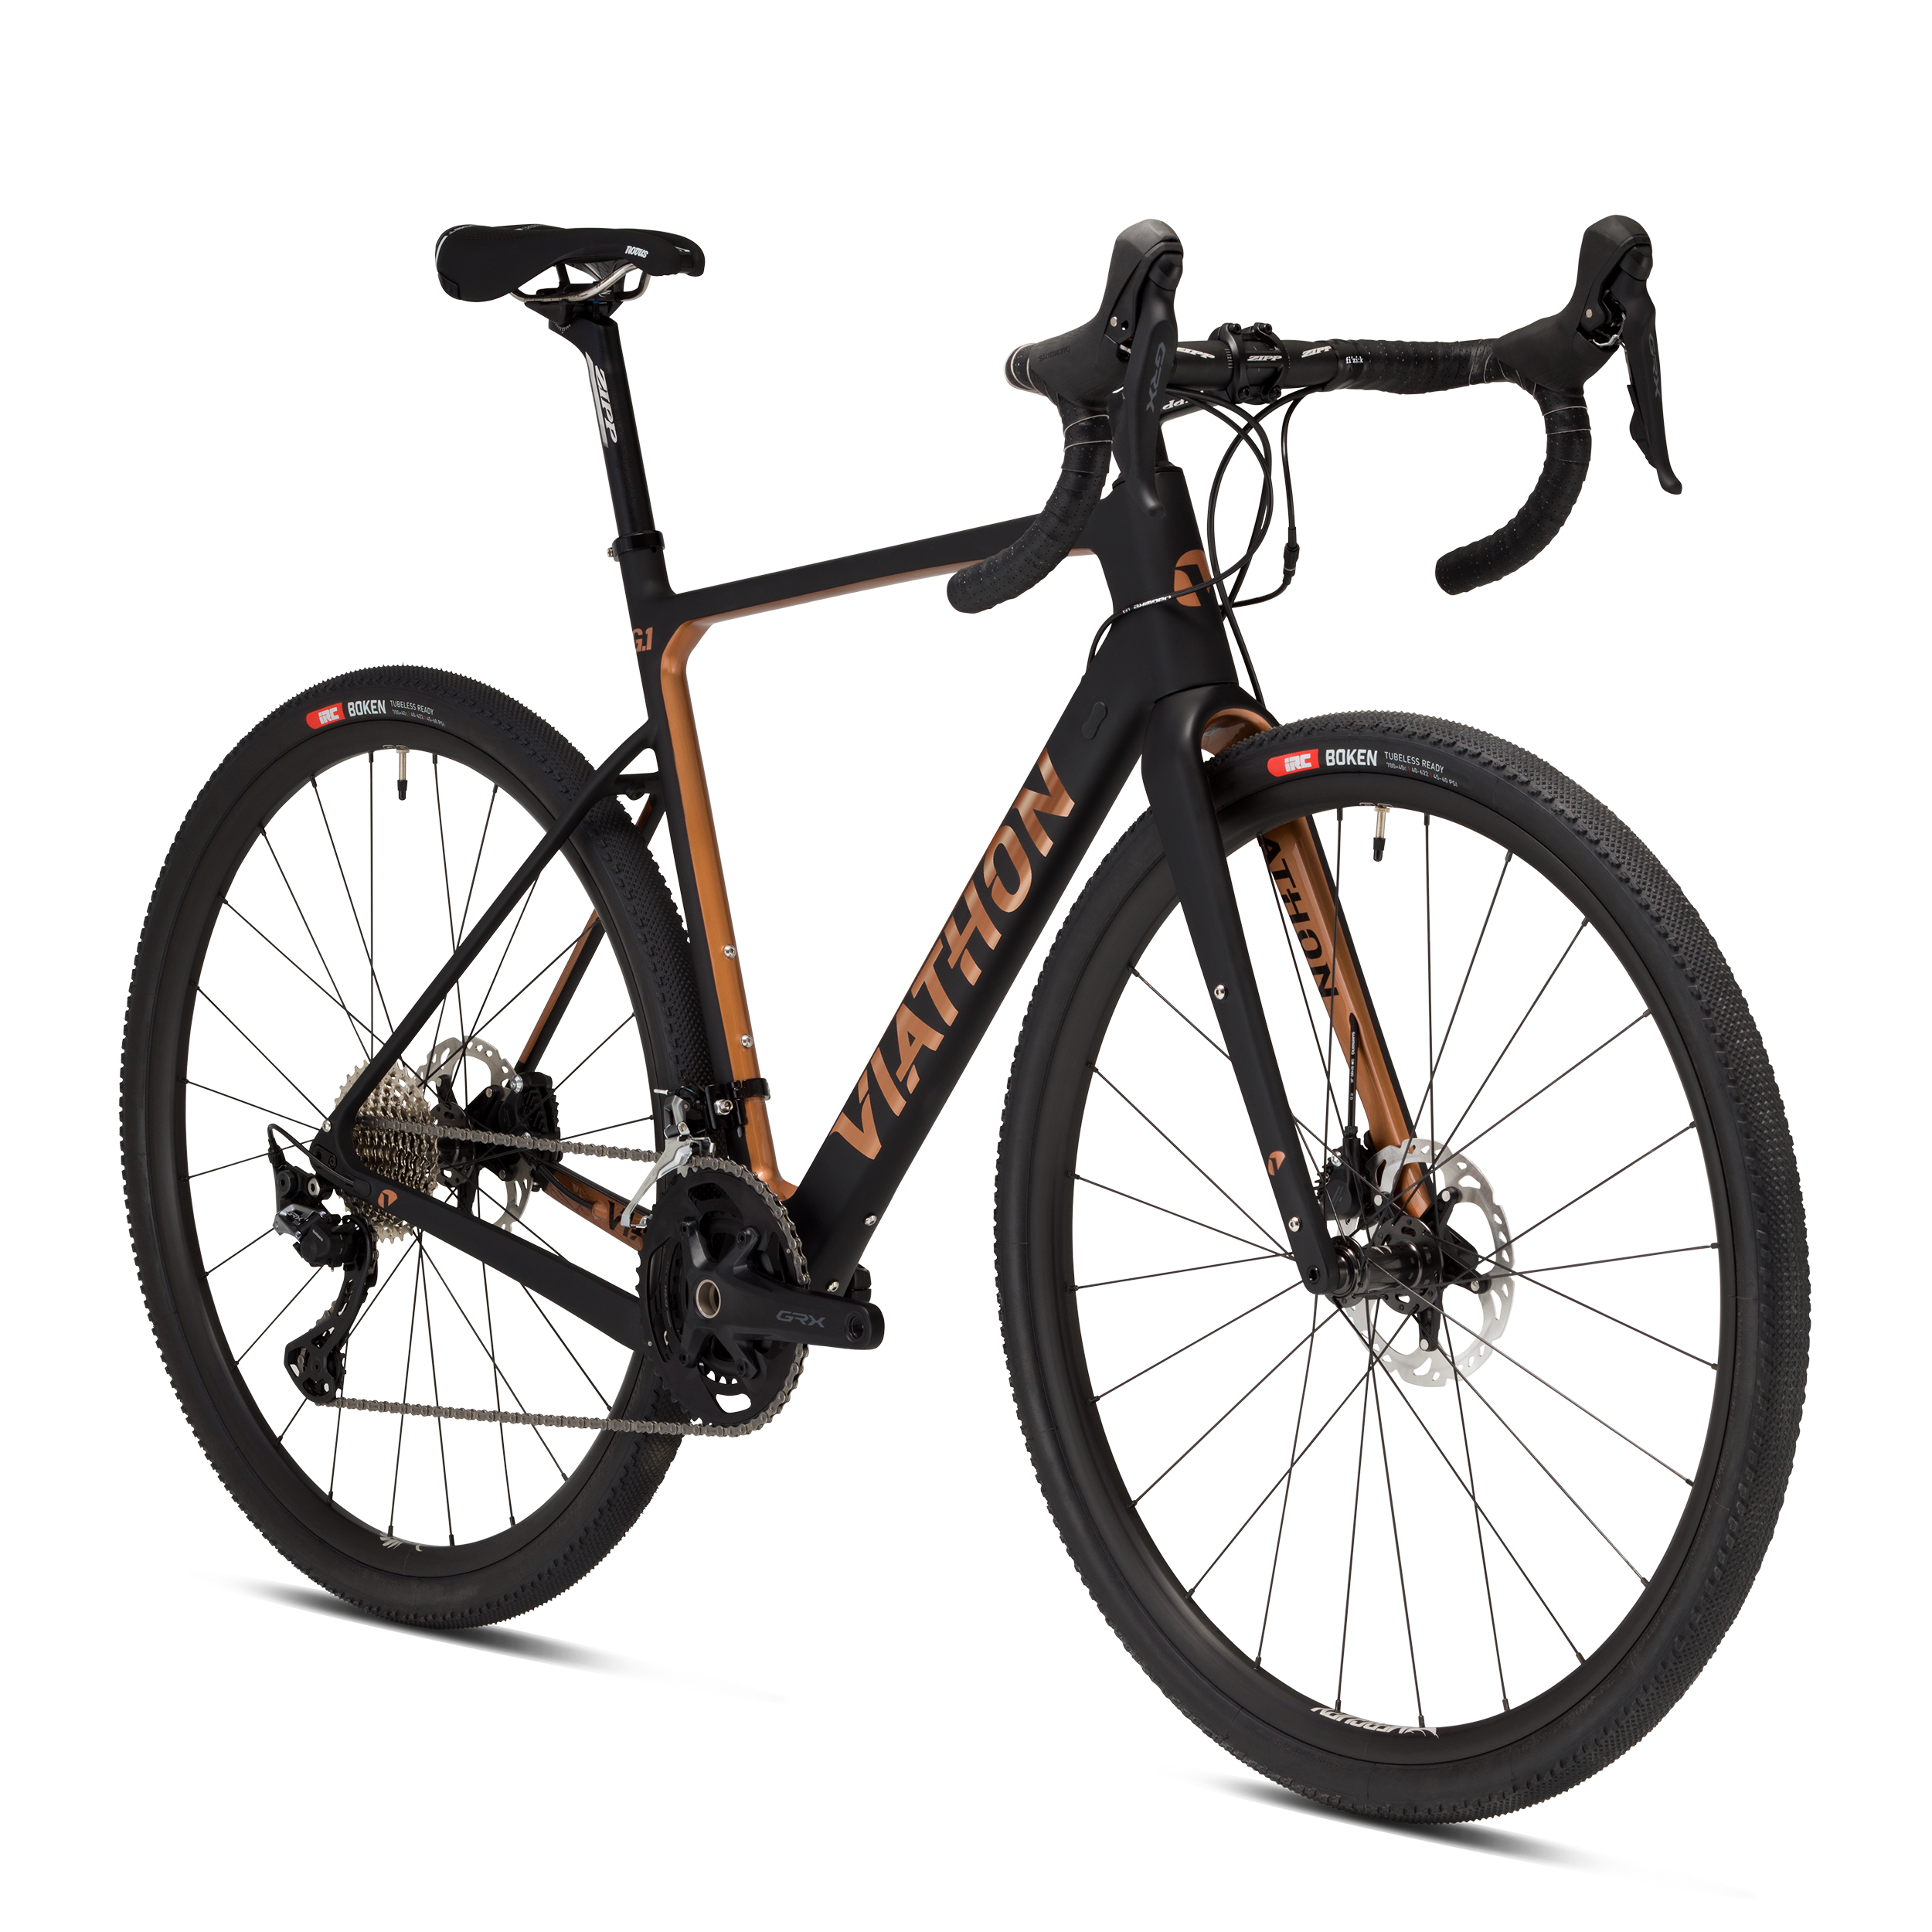 Bicycles | G.1 Gravel Allroad | Shimano GRX 600 Equipped